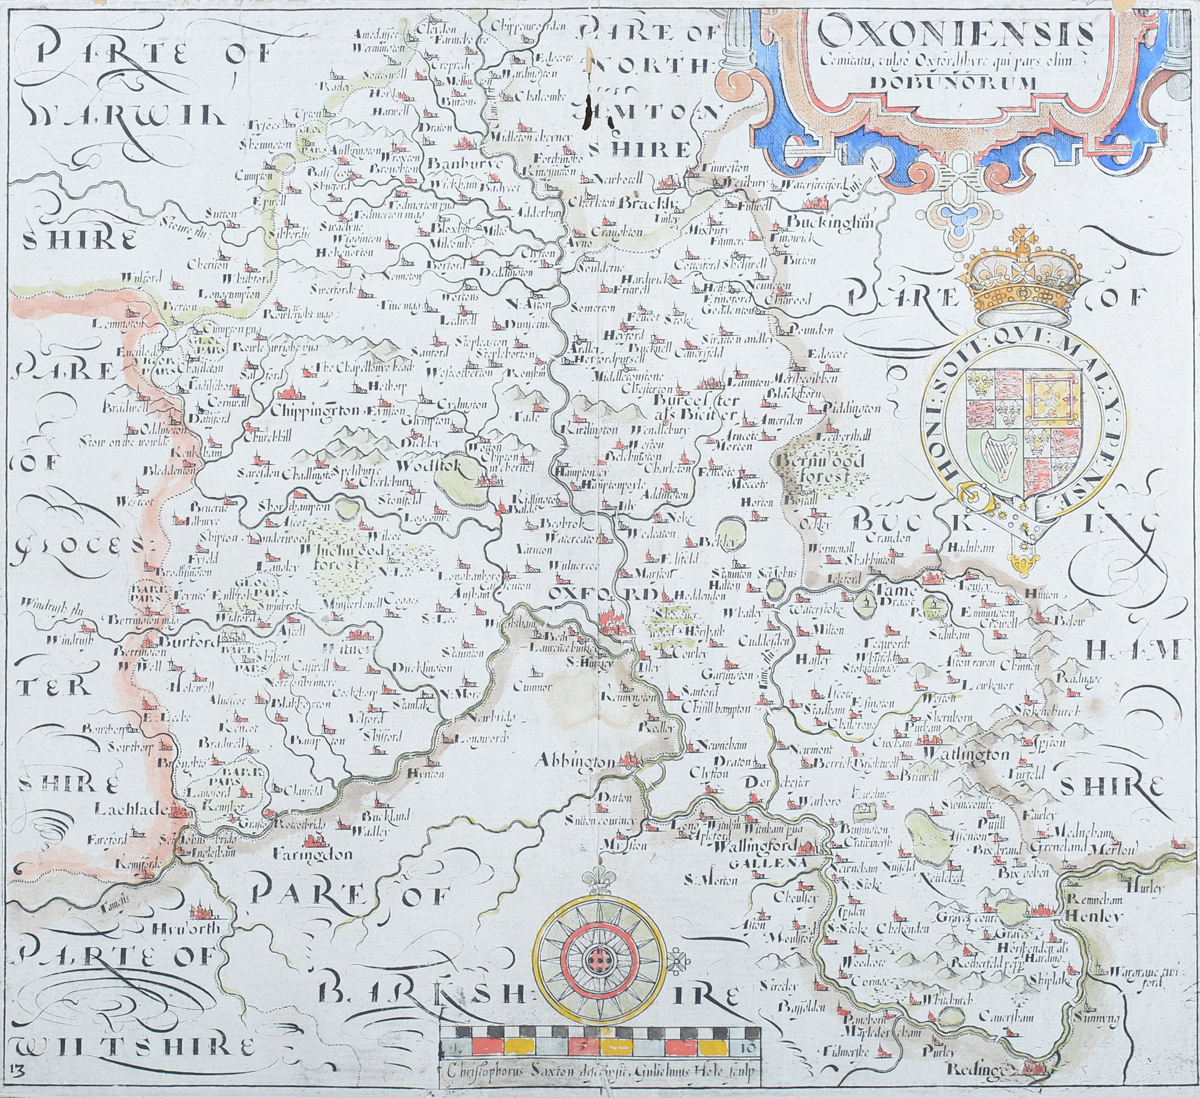 William Hole, after Christopher Saxton - 'Oxoniensis Comitatu' (Map of Oxfordshire), 17th century